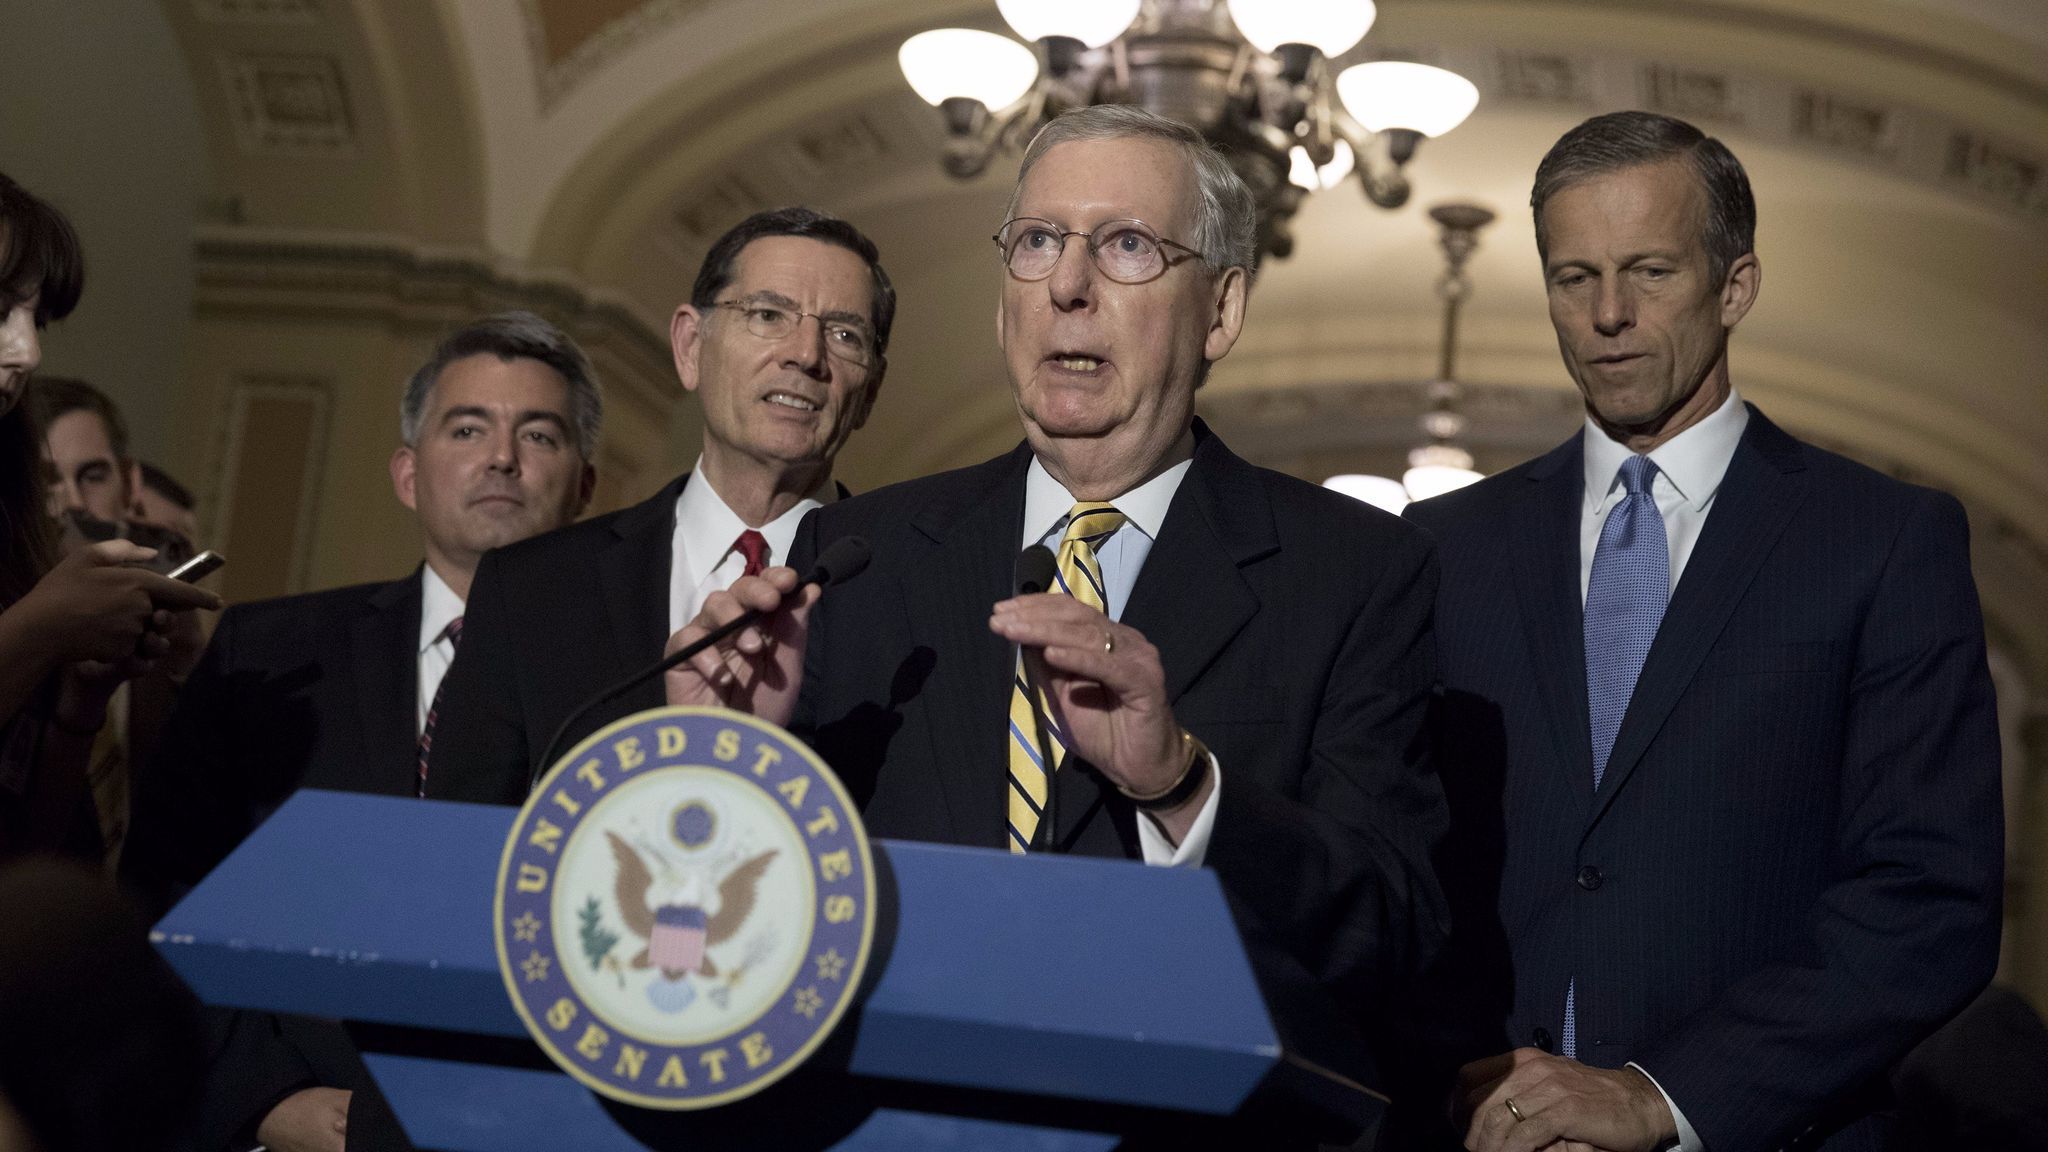 Senate Majority Leader Mitch McConnell (R-Ky.), flanked by Sen. Cory Gardner (R-Colo.), Sen. John Barrasso (R-Wyo.) and Sen. John Thune (R-S.D.), speaks to the media about the recent spending bill that averted a government shutdown.